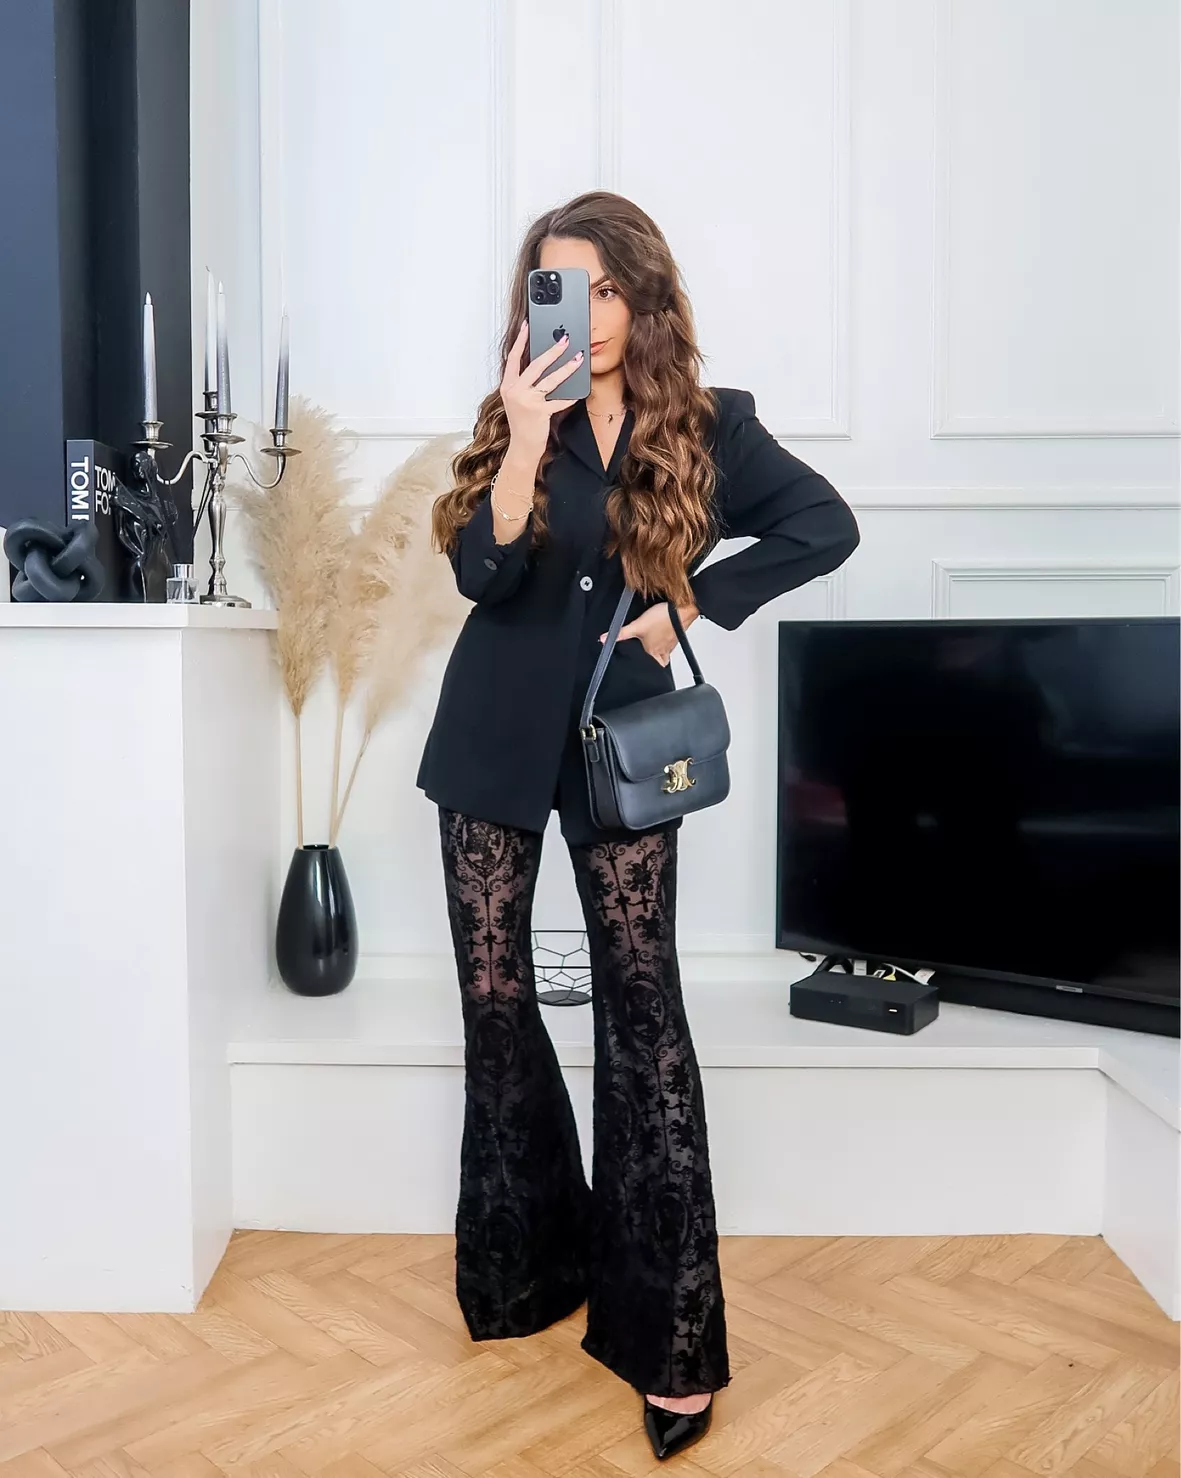 Black Sheer Lace High Waist Flared Trousers